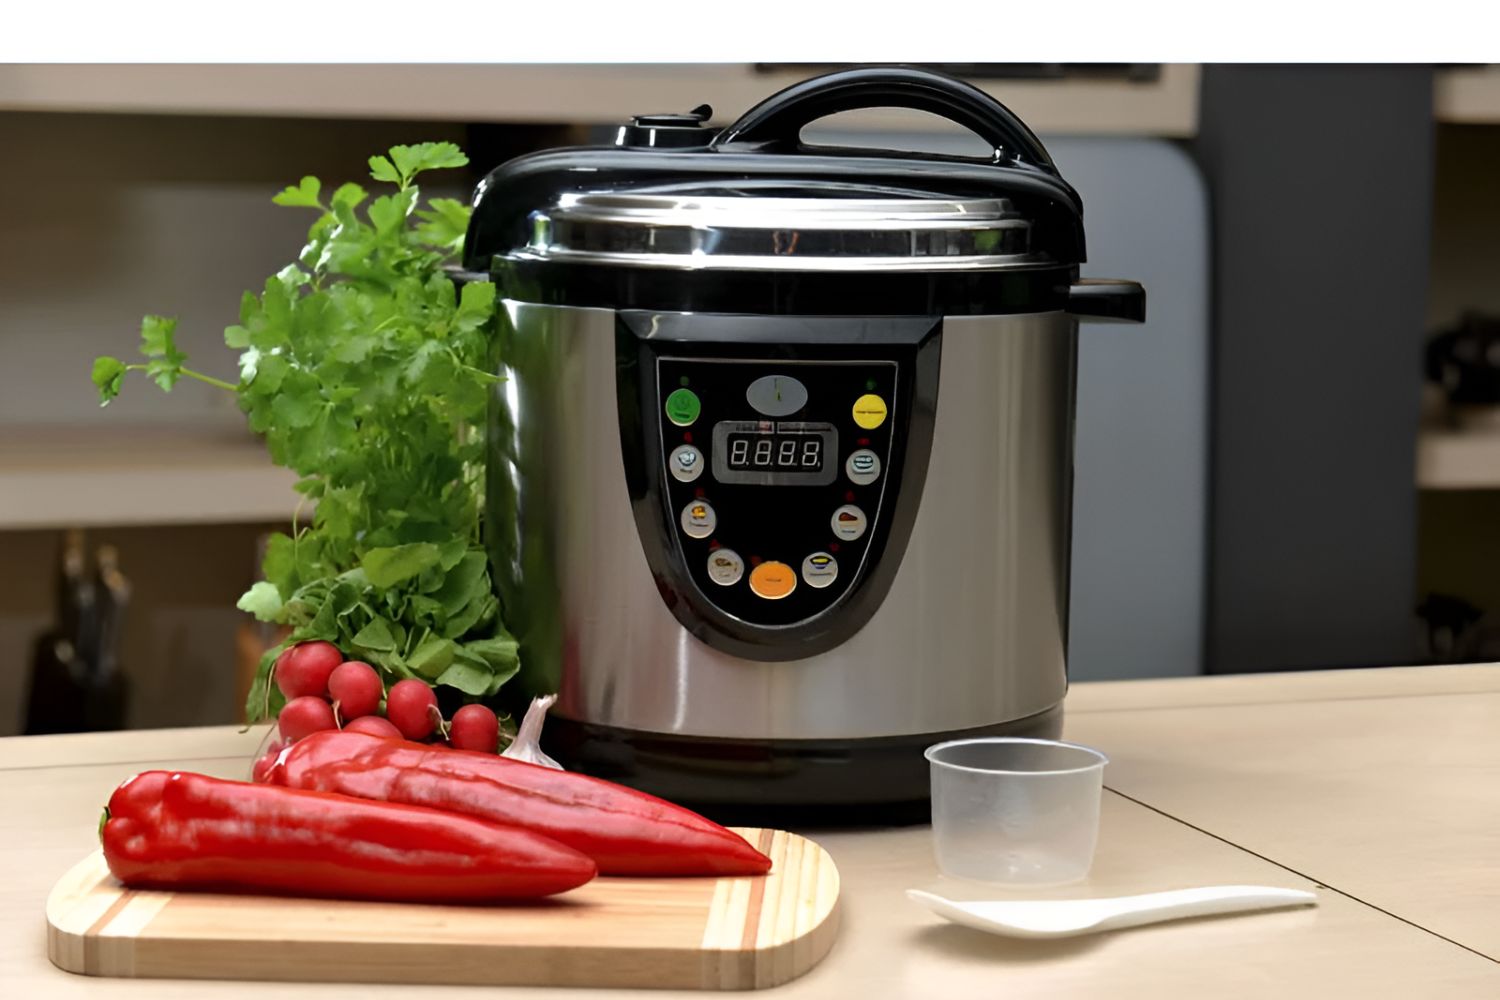 How To Use An Old Non-Instant Pot Ultra Electric Pressure Cooker